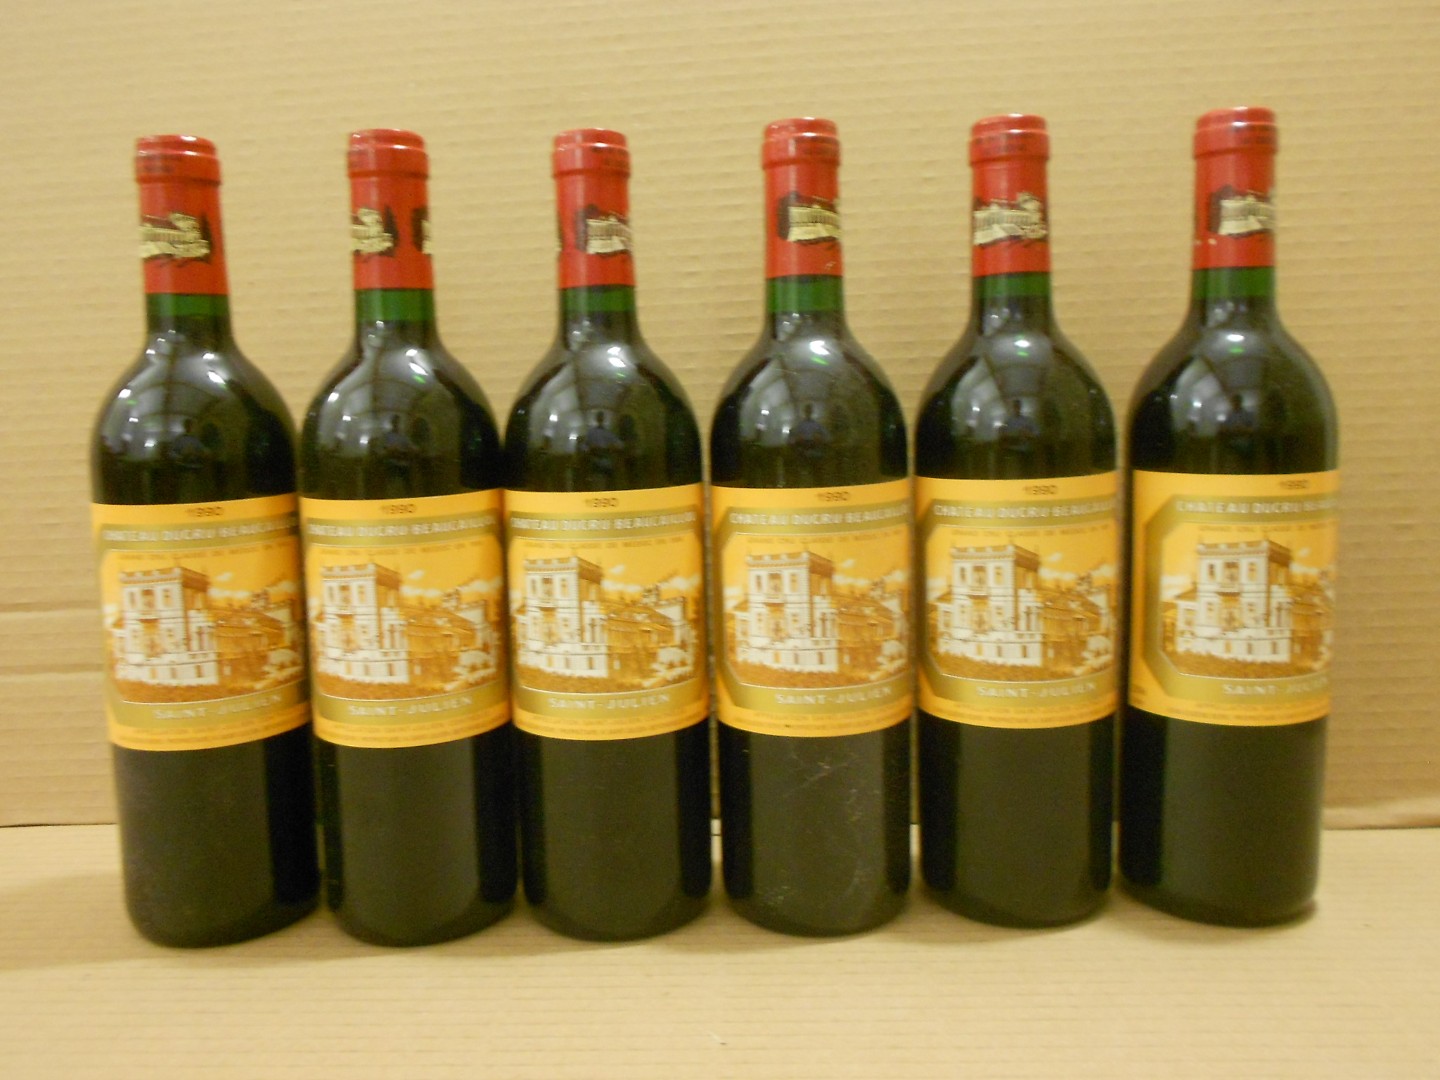 Chateau Ducru Beaucaillou, St Julien 2eme Cru 1990, twelve bottles. Removed from a college cellar